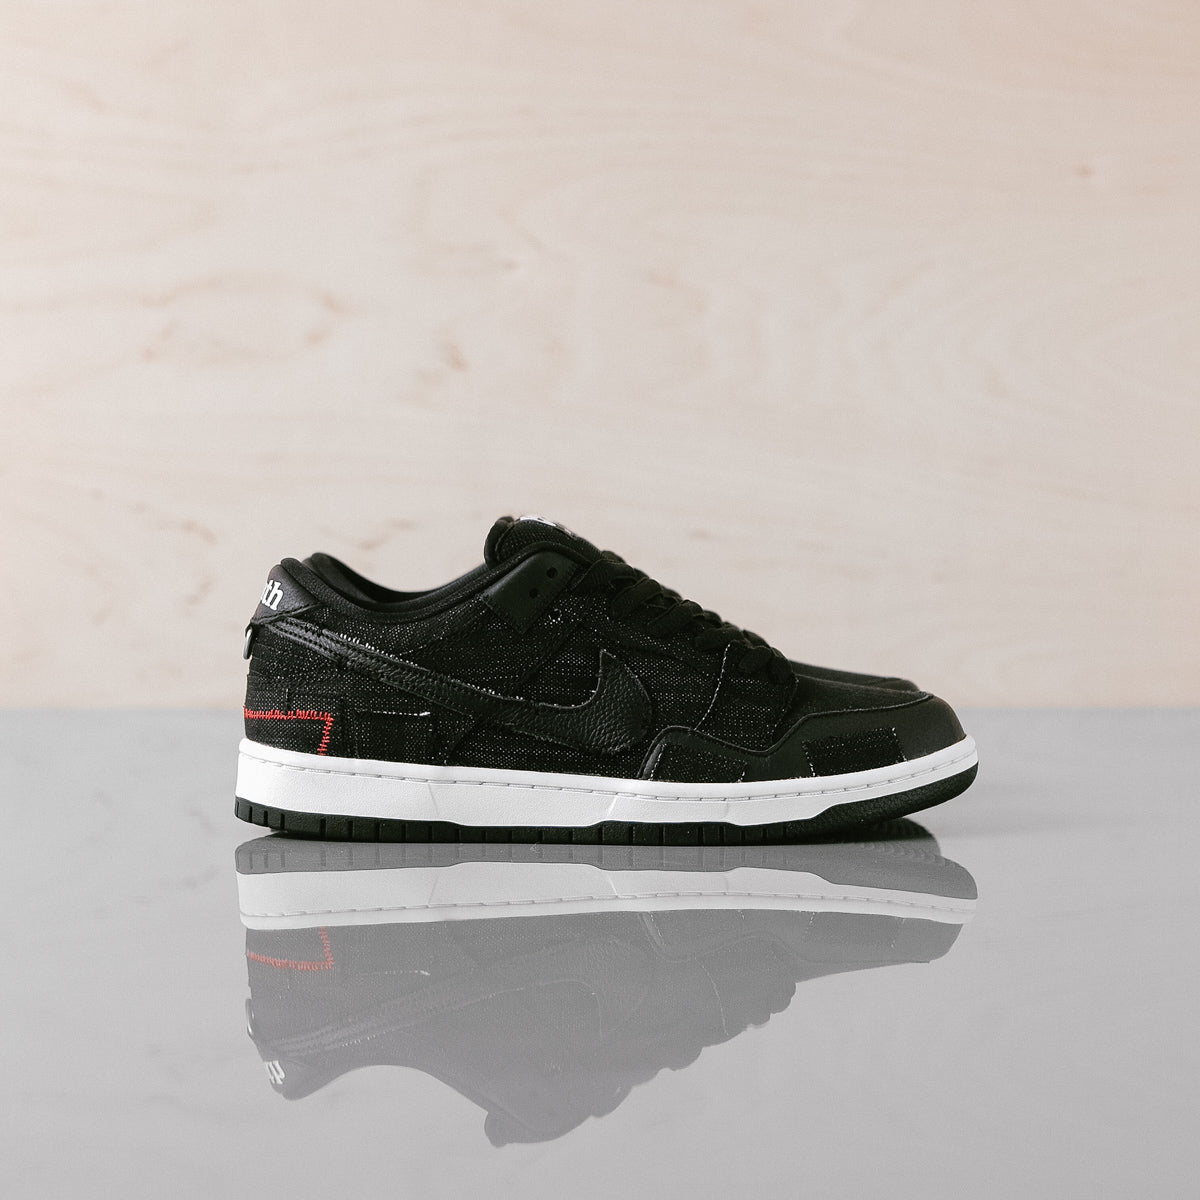 Nike SB x Wasted Youth Dunk Low Pro | Flatspot